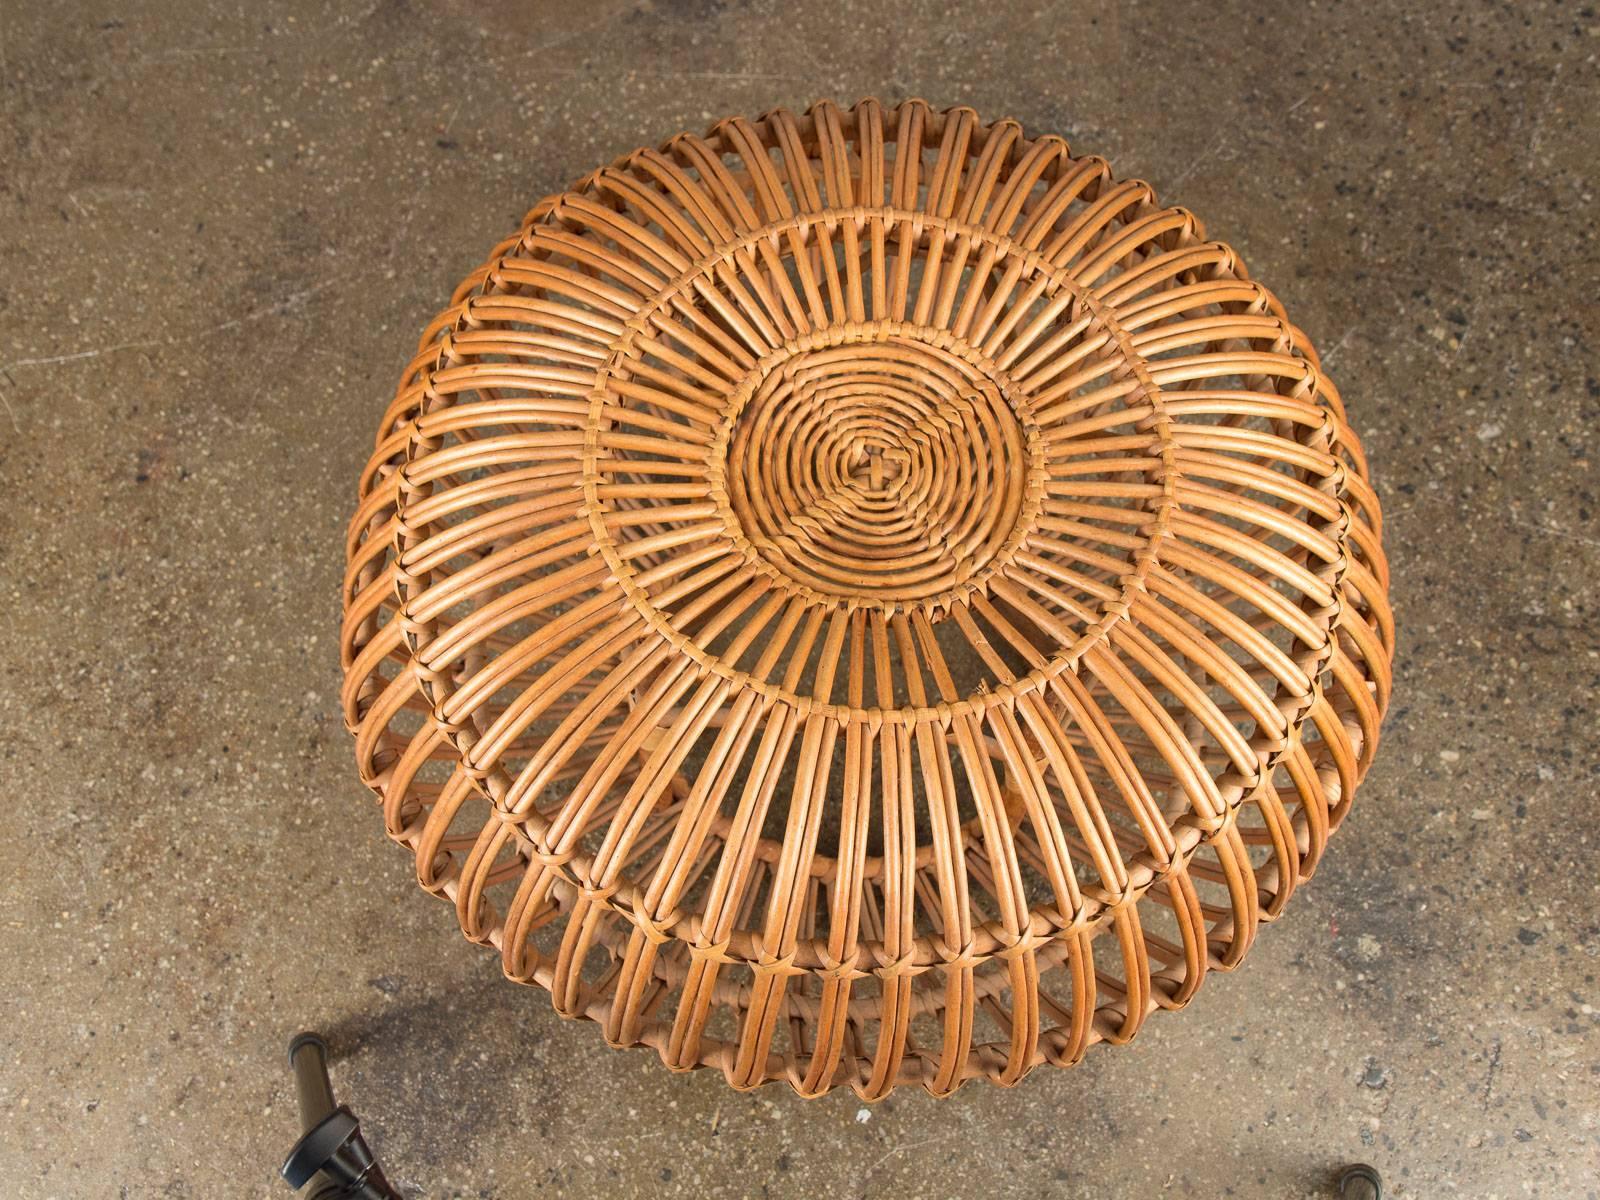 Vintage Albini foot stool woven of rattan. In excellent condition with a few small breaks. Stunning and sturdy.

Measures: 25